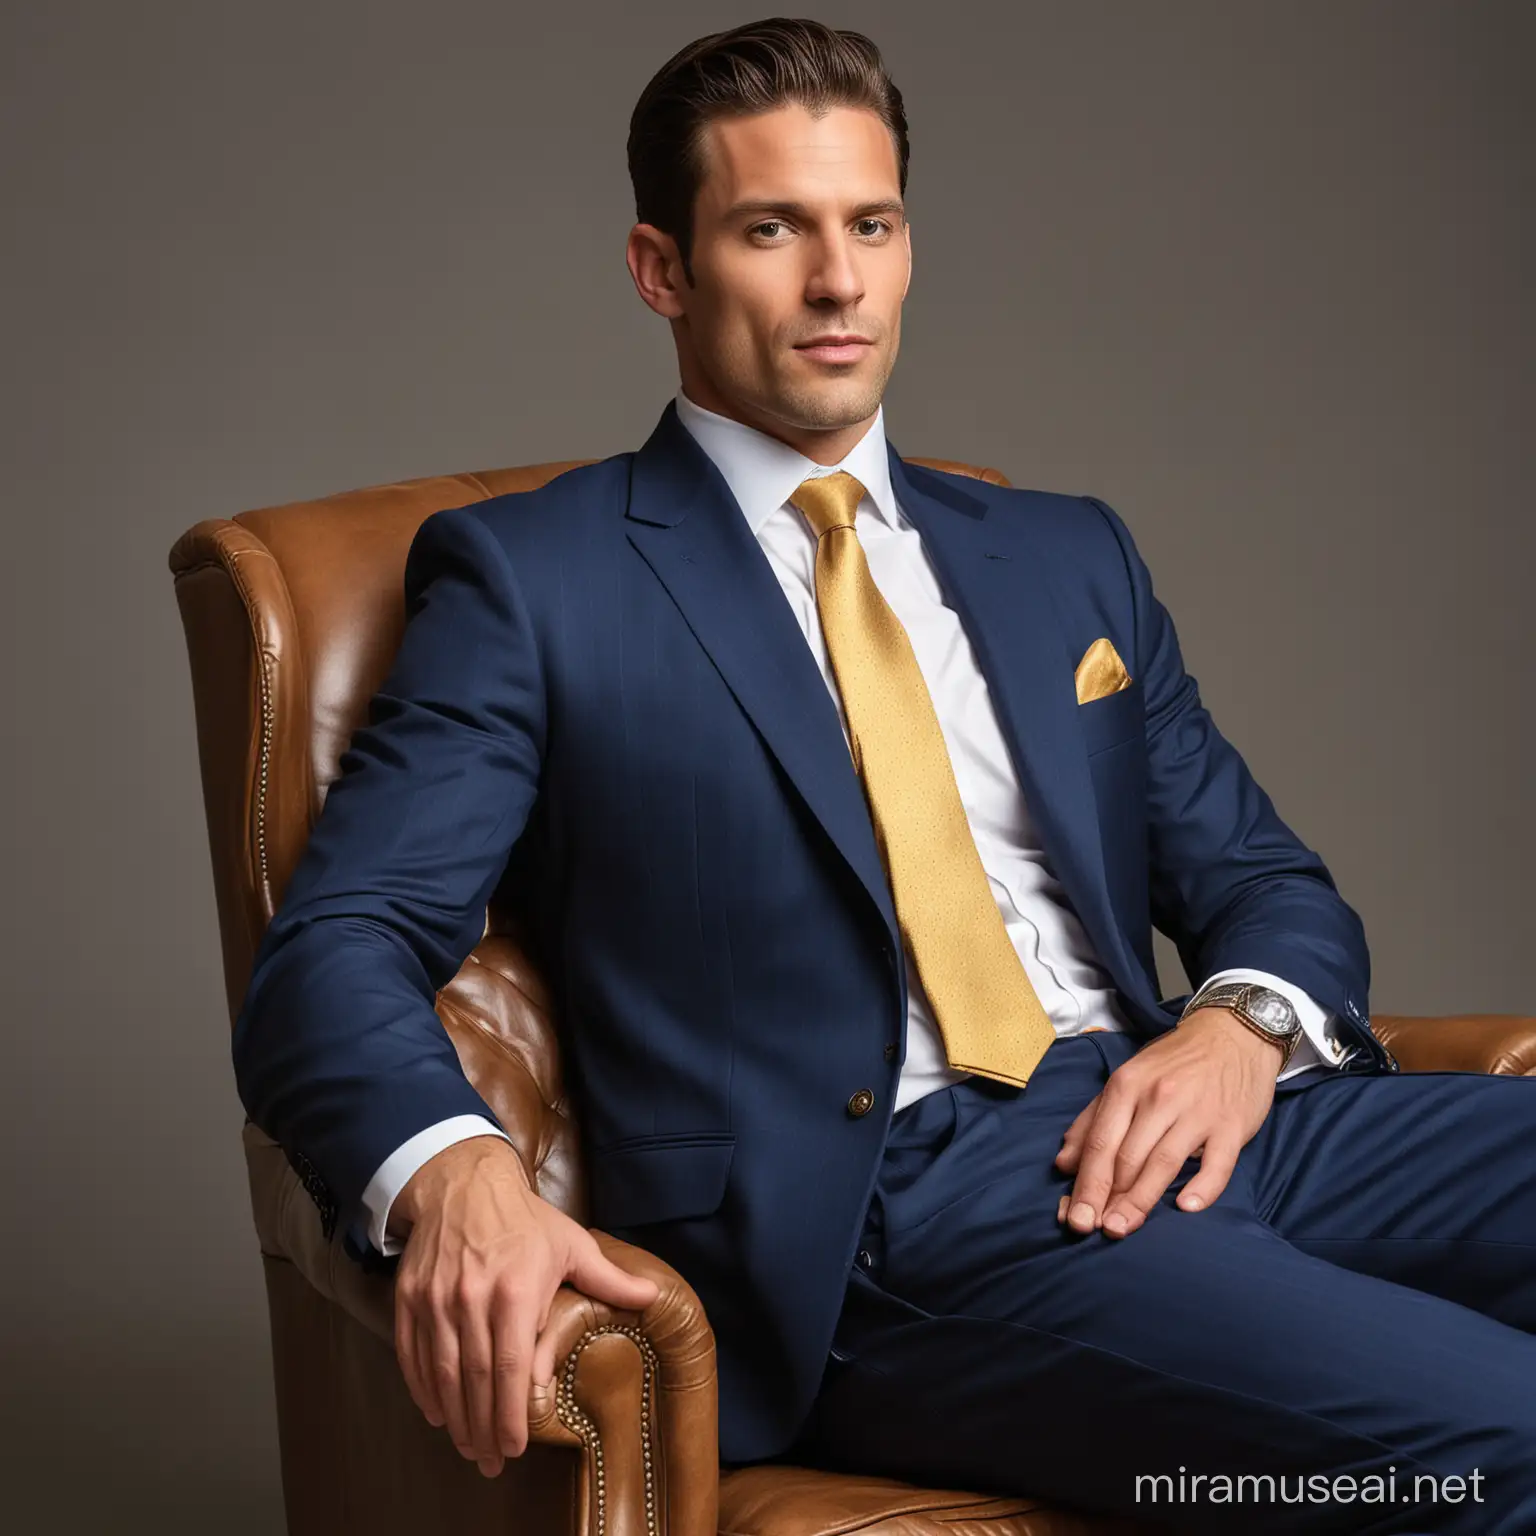 A handsome 35 year old businessman in a three piece navy pinstripe suit and smart shoes, standing behind him a distinguished 30 year old cleanshaven pastor in a blue suit with a gold tie reaching inside the 55 year old's jacket pocket and taking his pocket square. The 35 year old man is lying on a reclining chair gasping for air. Realistic photo.